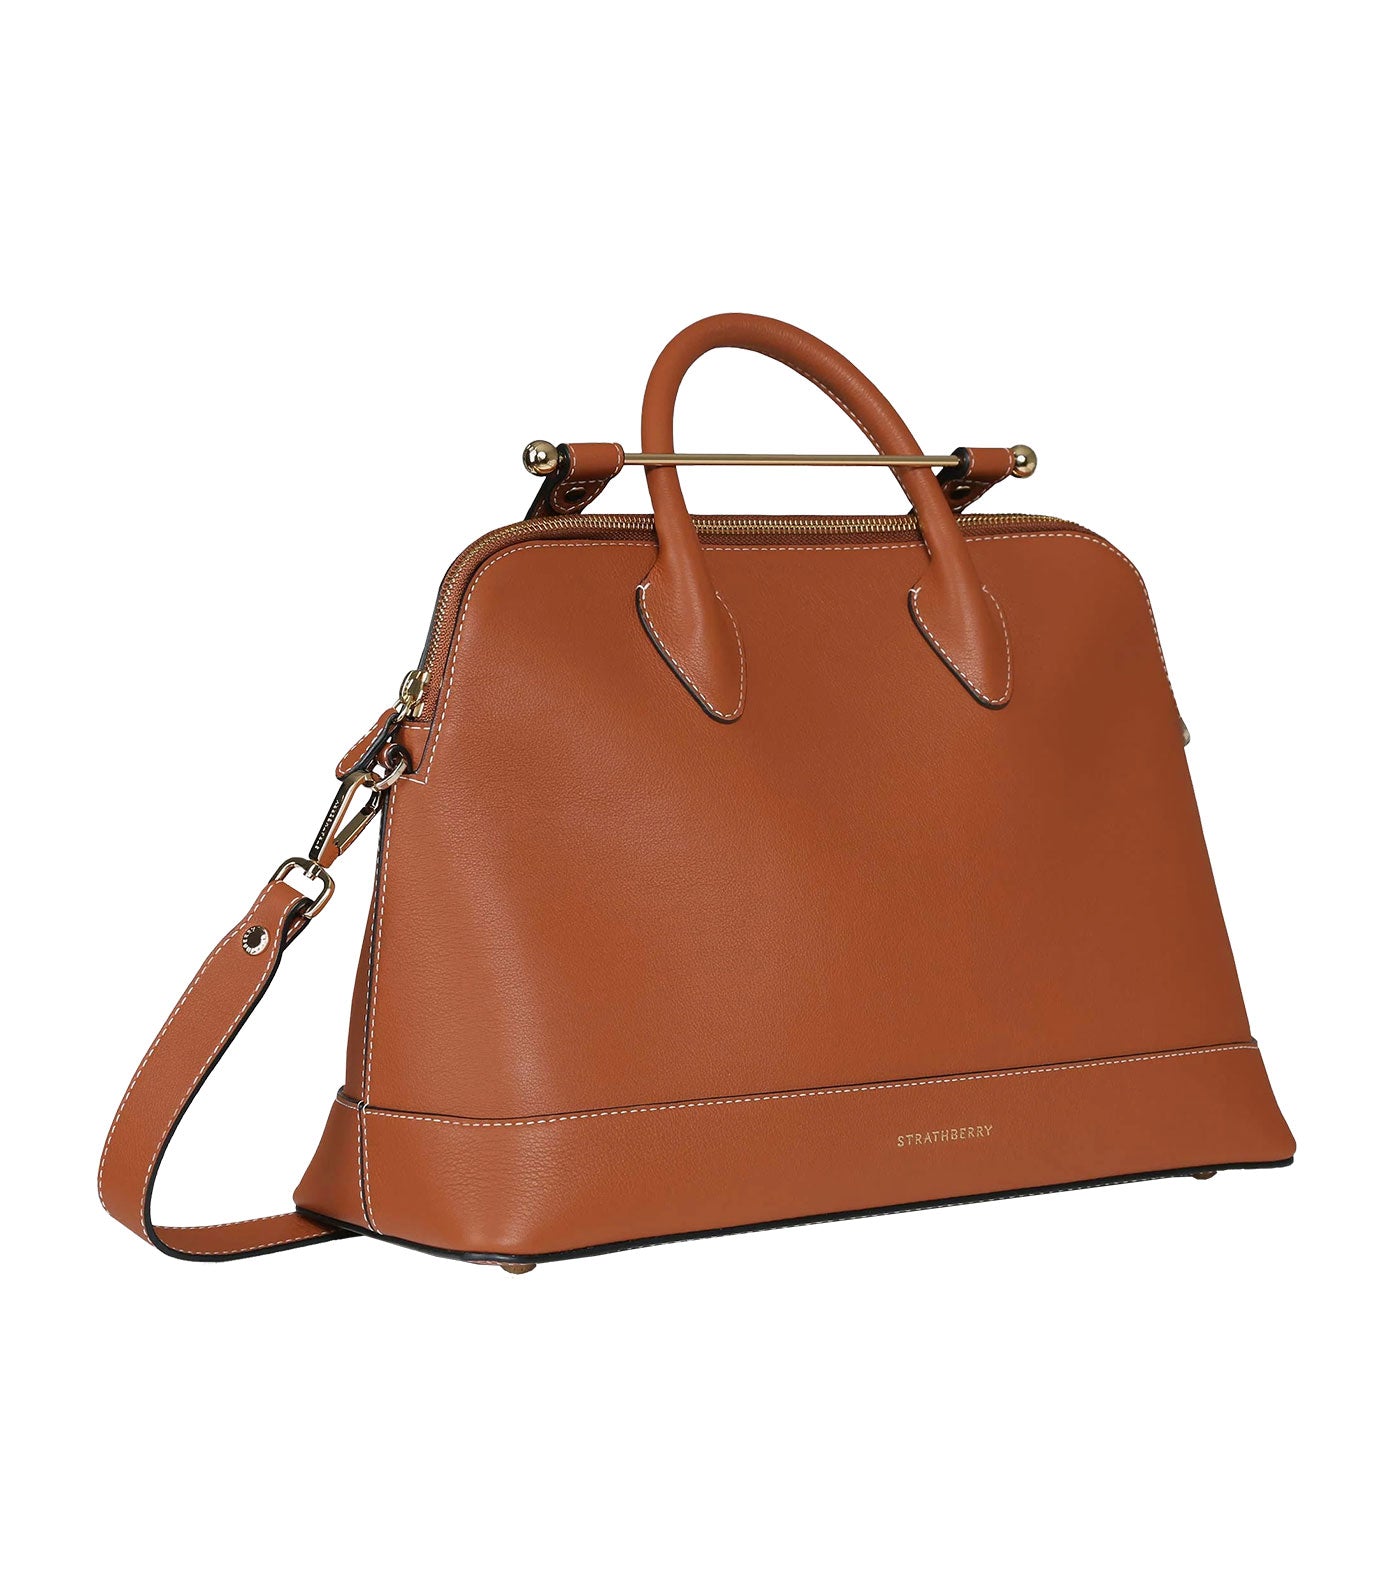 STRATHBERRY: leather midi tote bag - Brown  Strathberry tote bags  20204-100-125-455-w online at